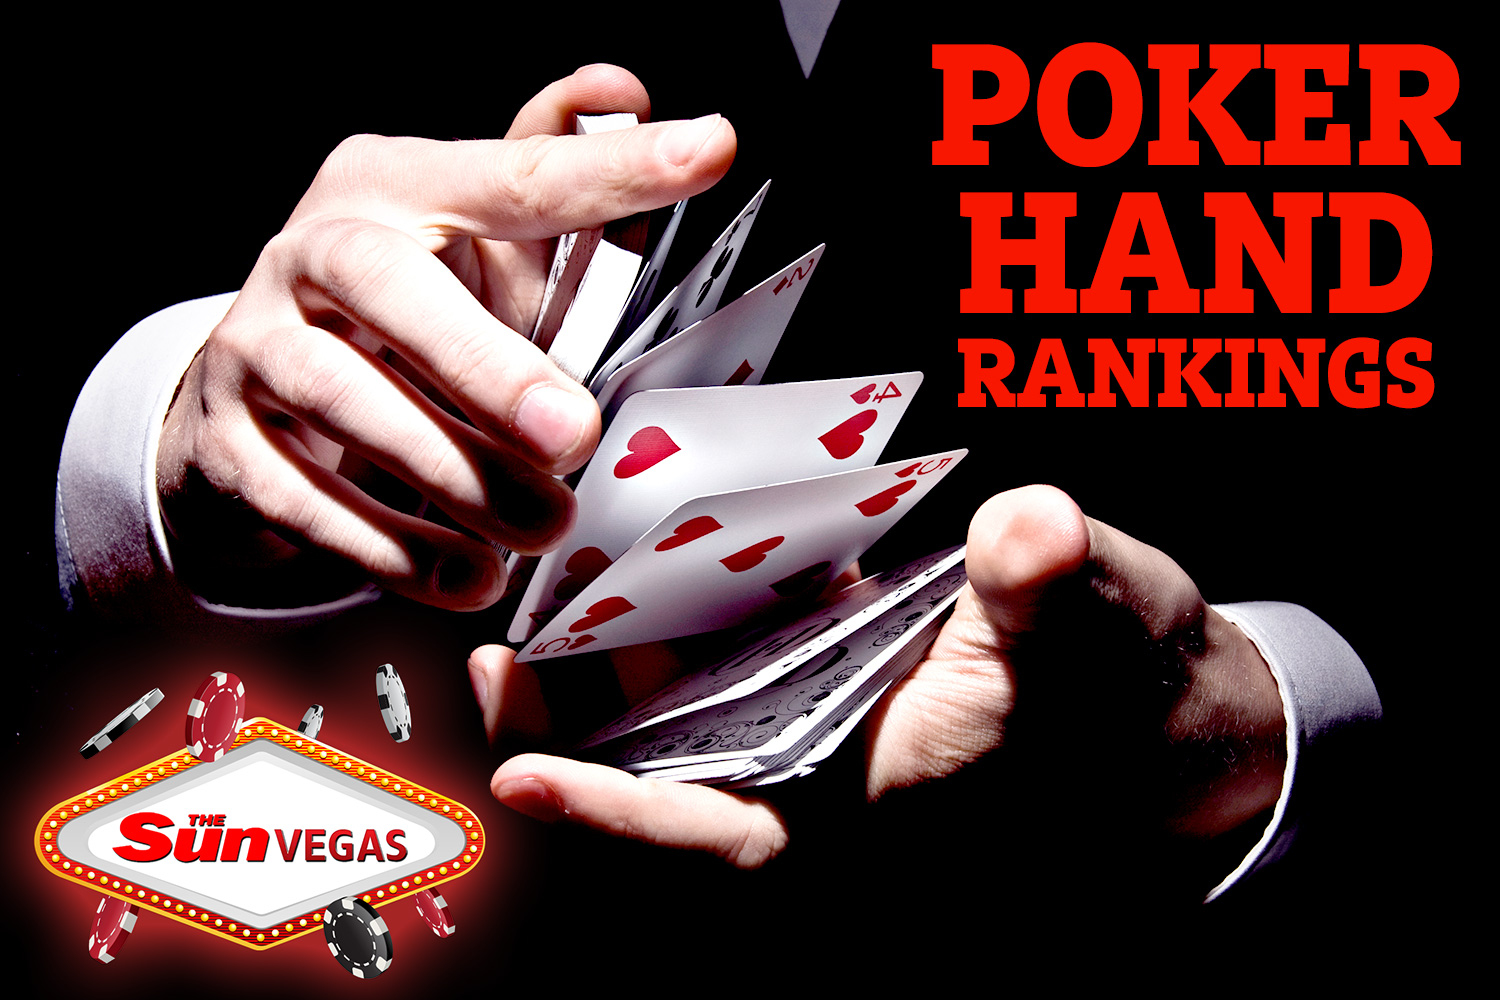 From high card to royal flush – what are all the different poker hands?